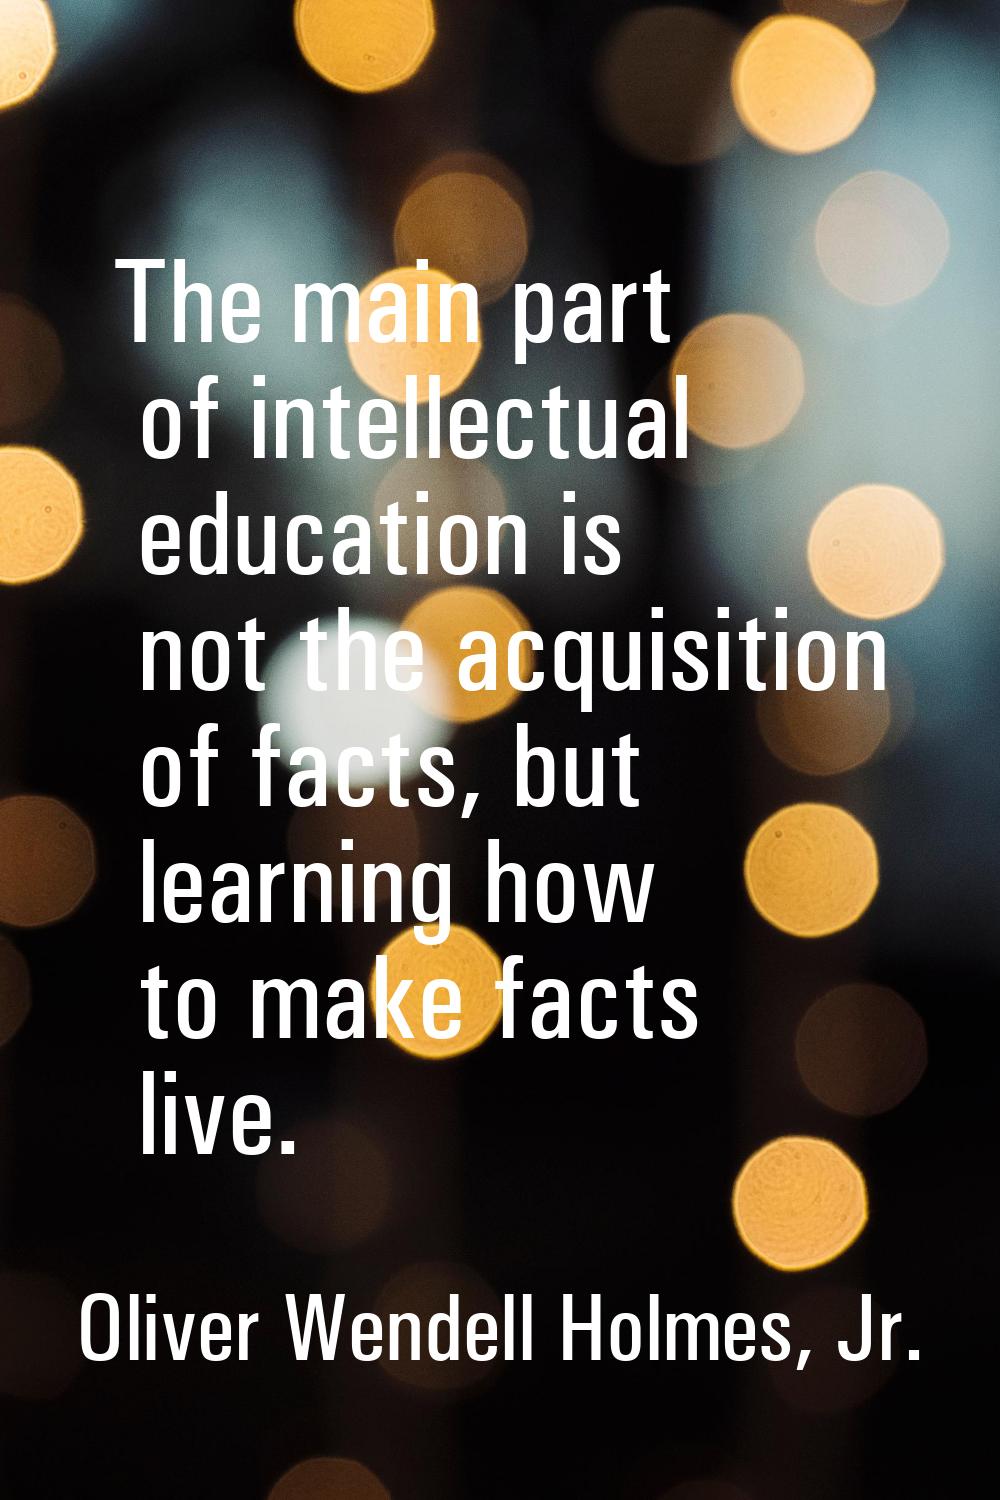 The main part of intellectual education is not the acquisition of facts, but learning how to make f